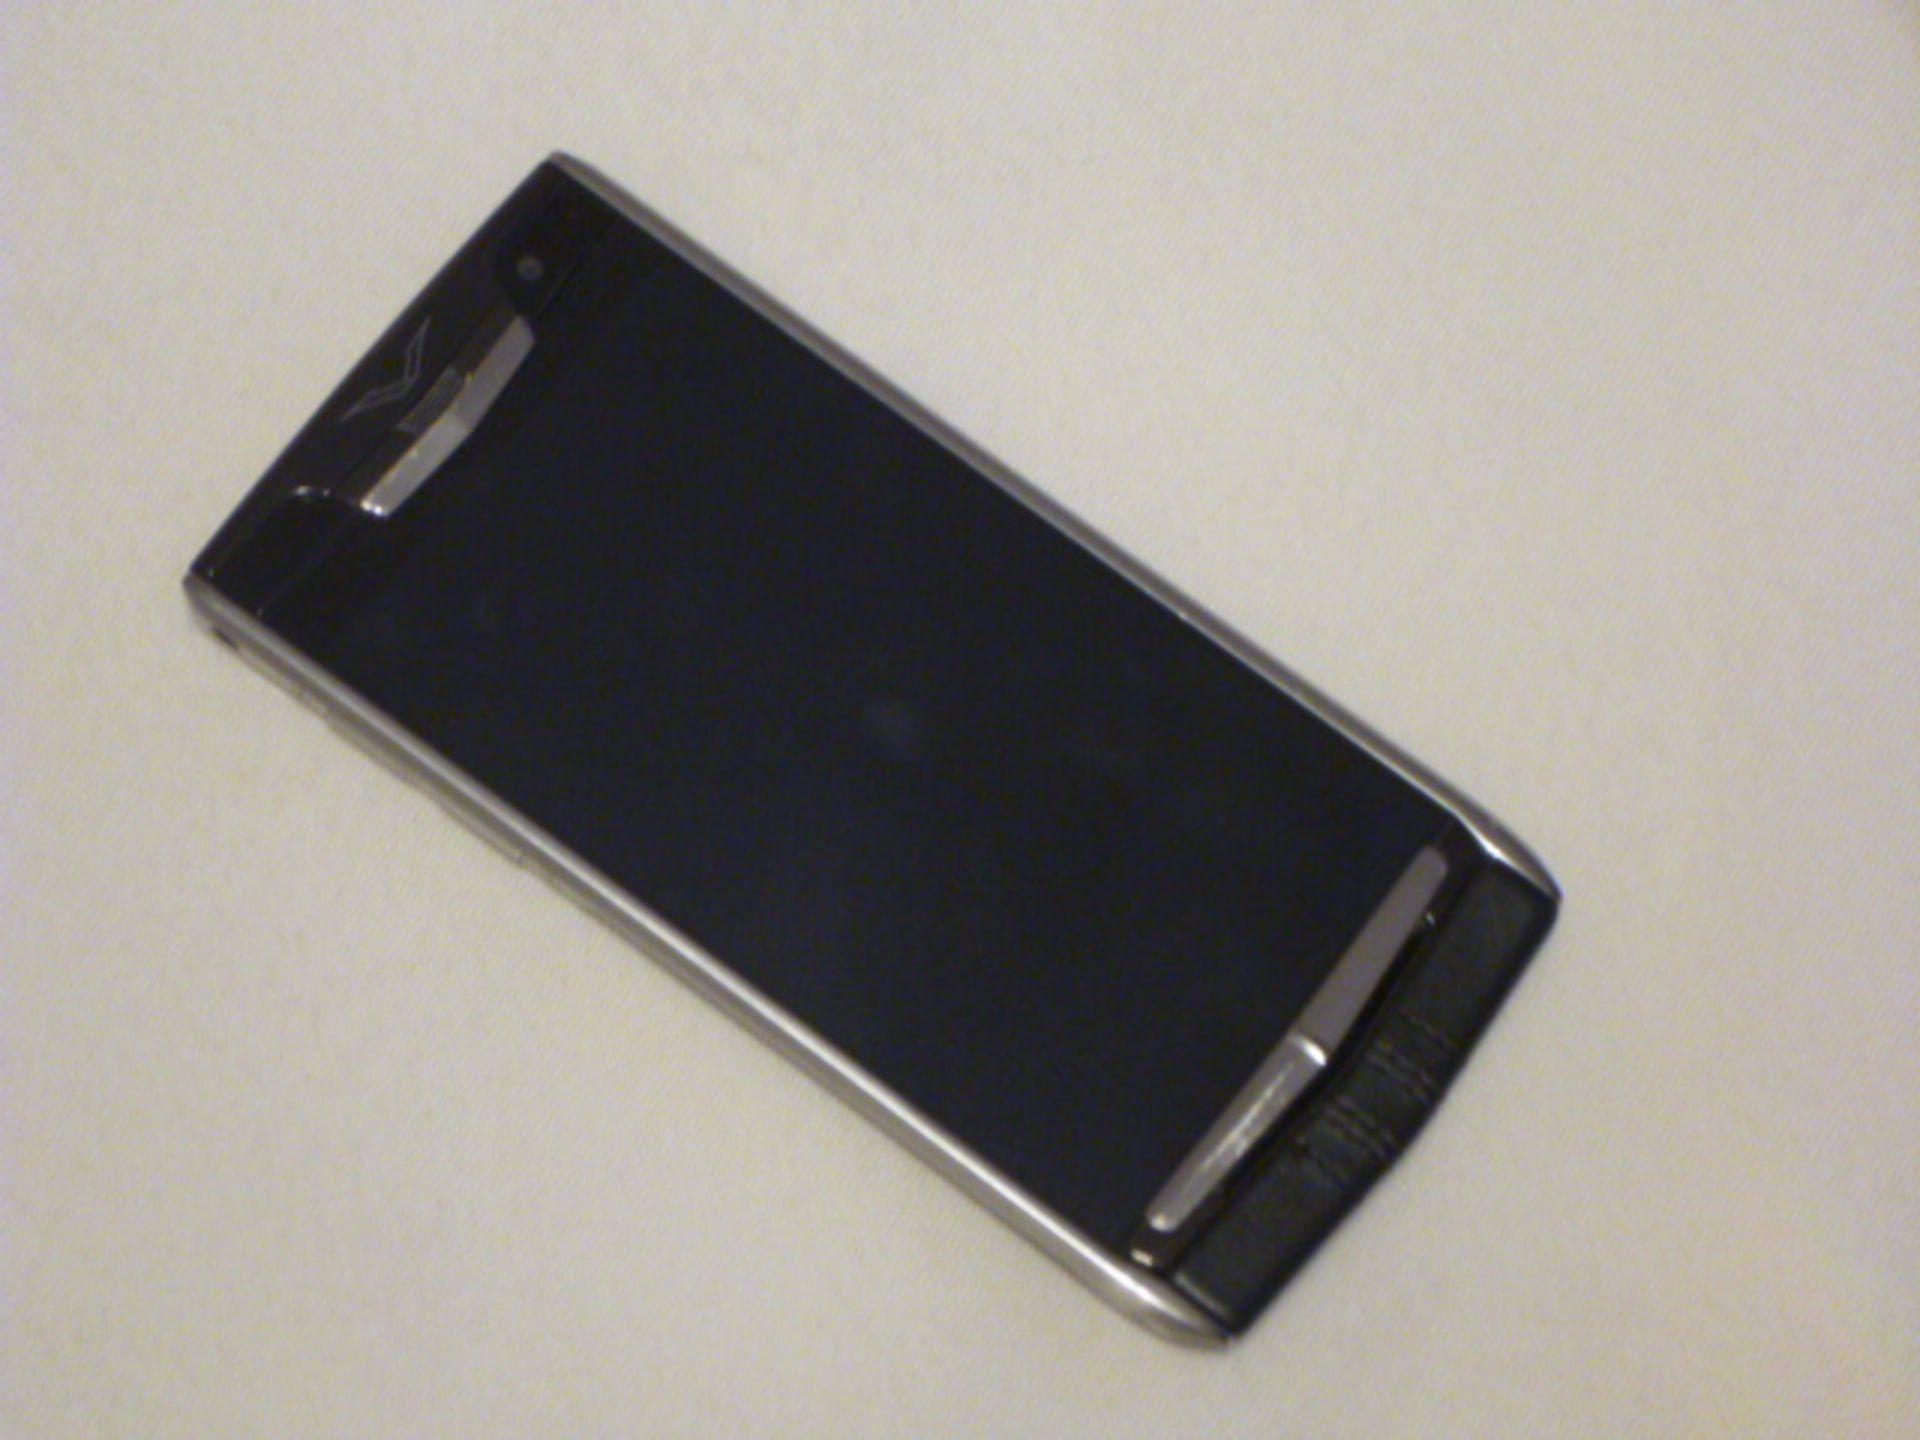 Vertu Signature Touch, Jet Calf. Demonstrator, S/N 3-001590. Tested Working, but without Warranty or